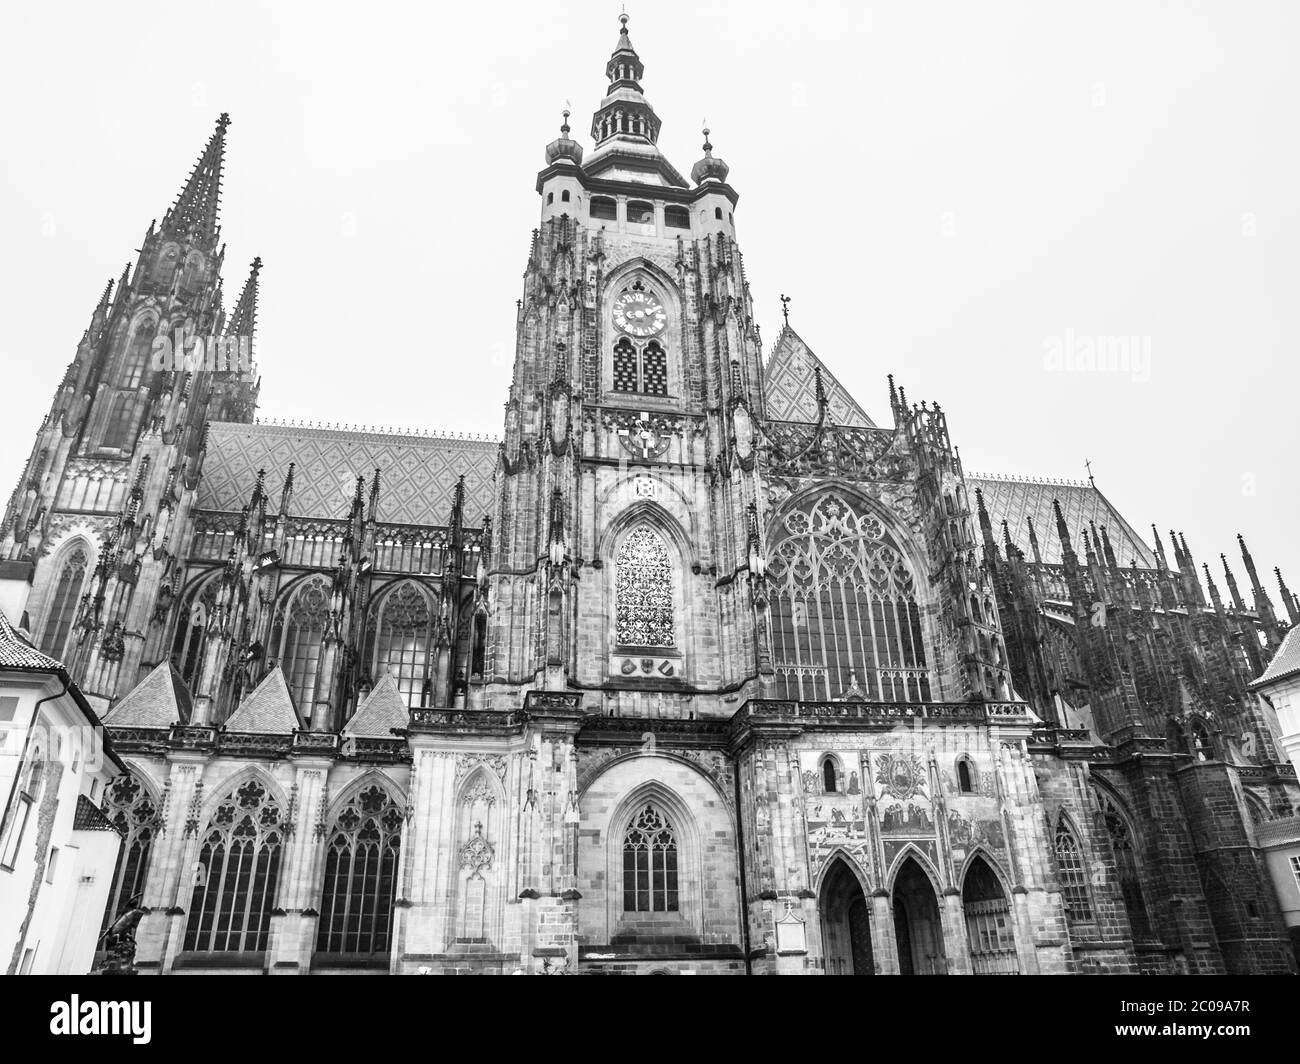 St. Vitus Cathedral in Prague, Czech Republic, black and white image Stock Photo